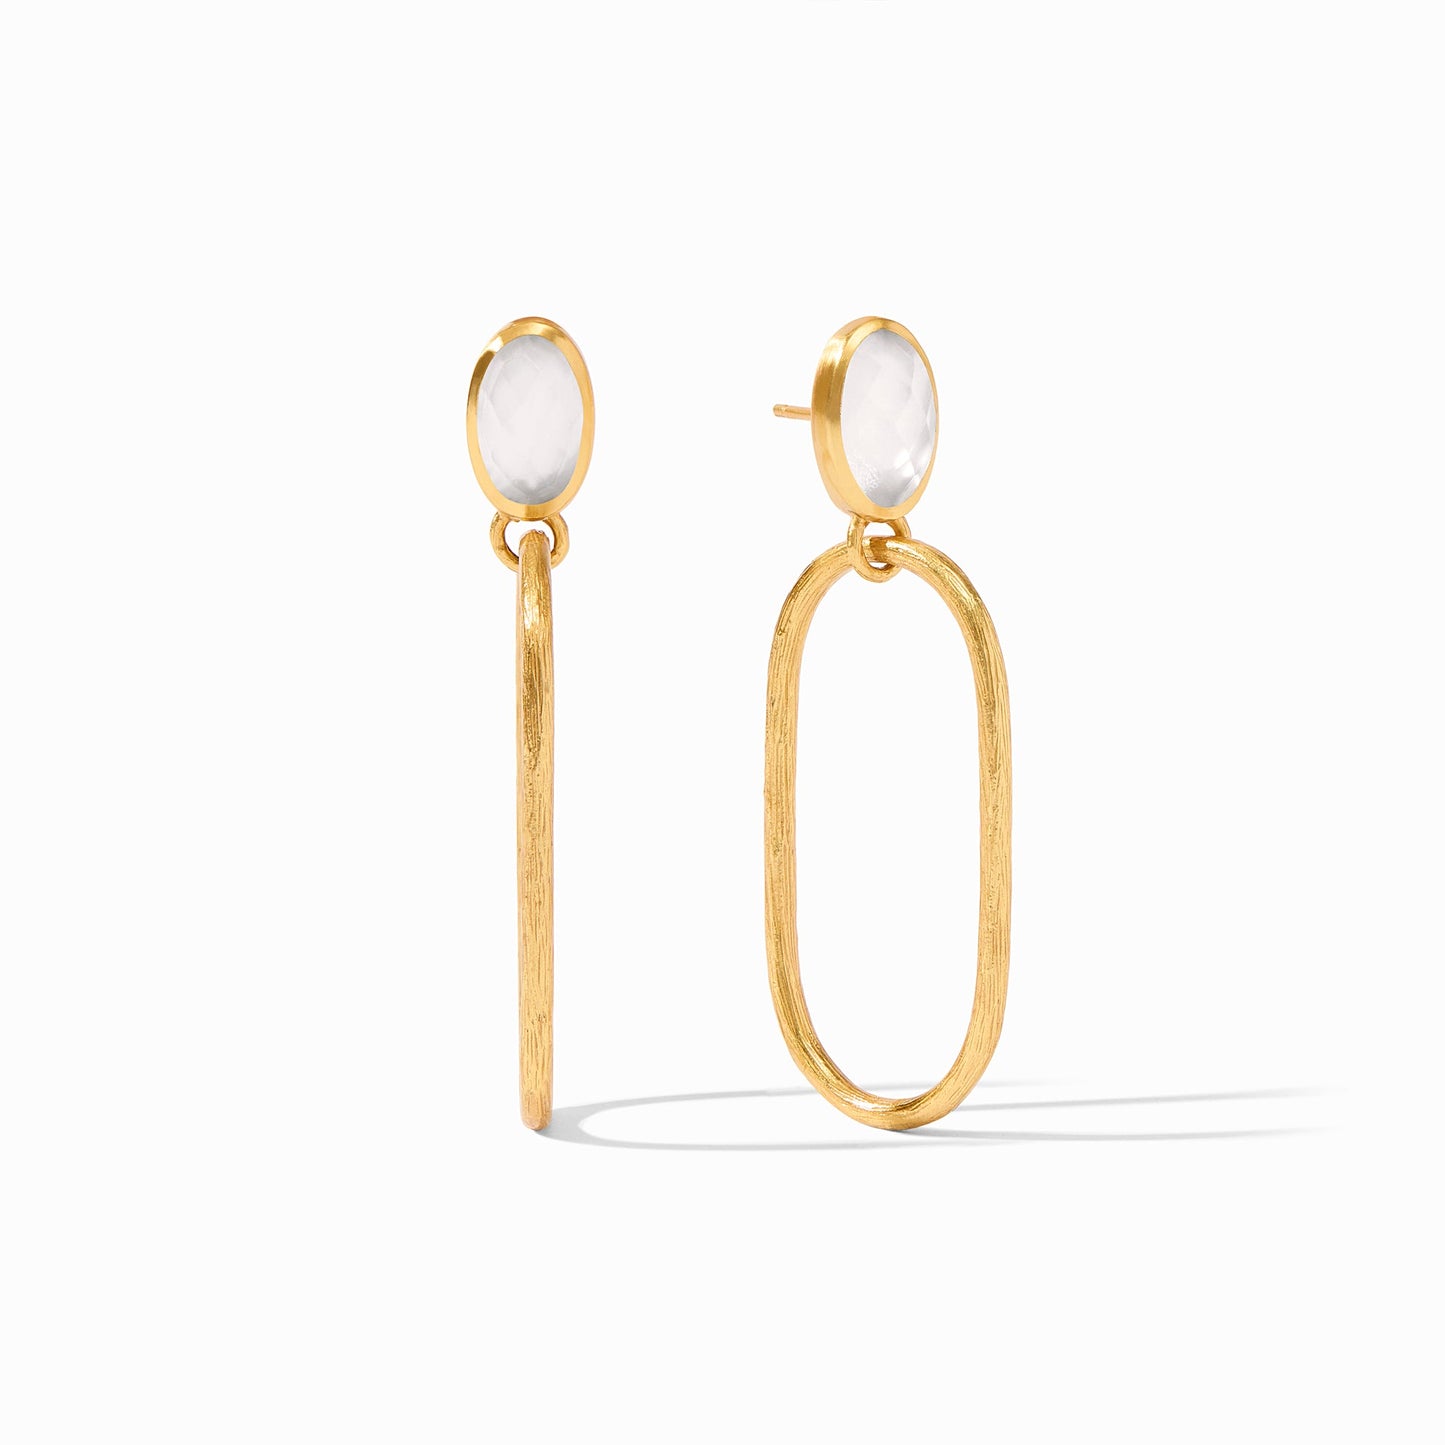 Julie Vos "Ivy" Statement Earring-3 Colors